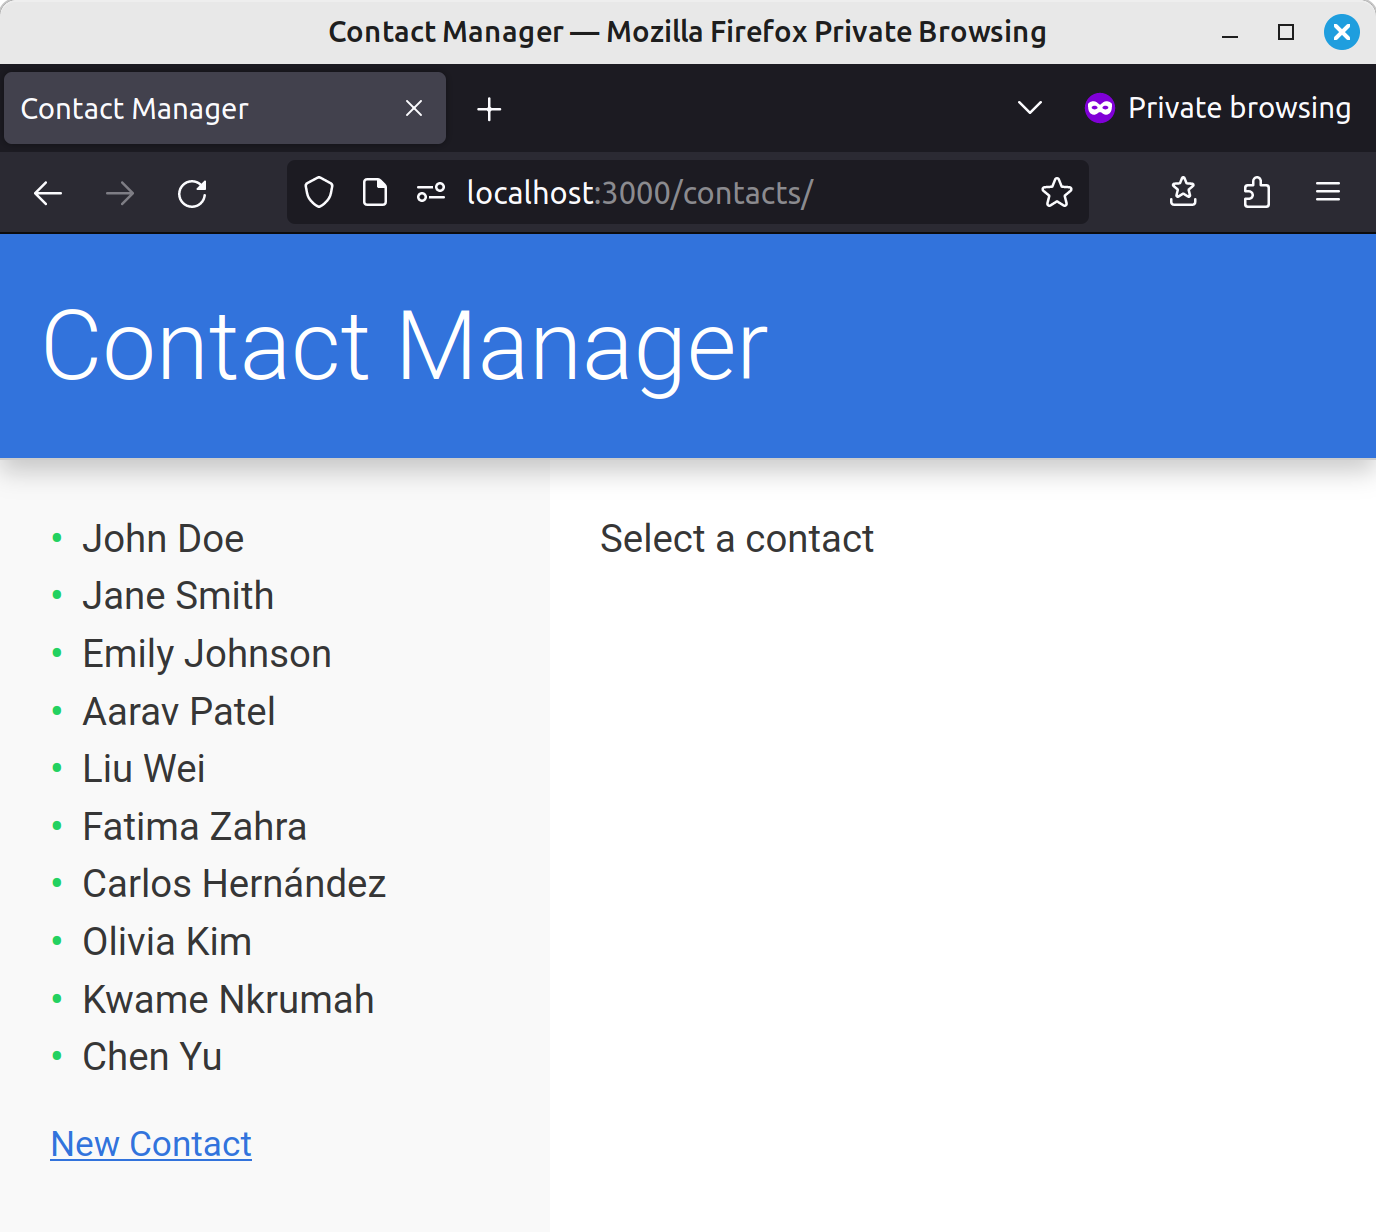 Contact manager displaying a list of contacts